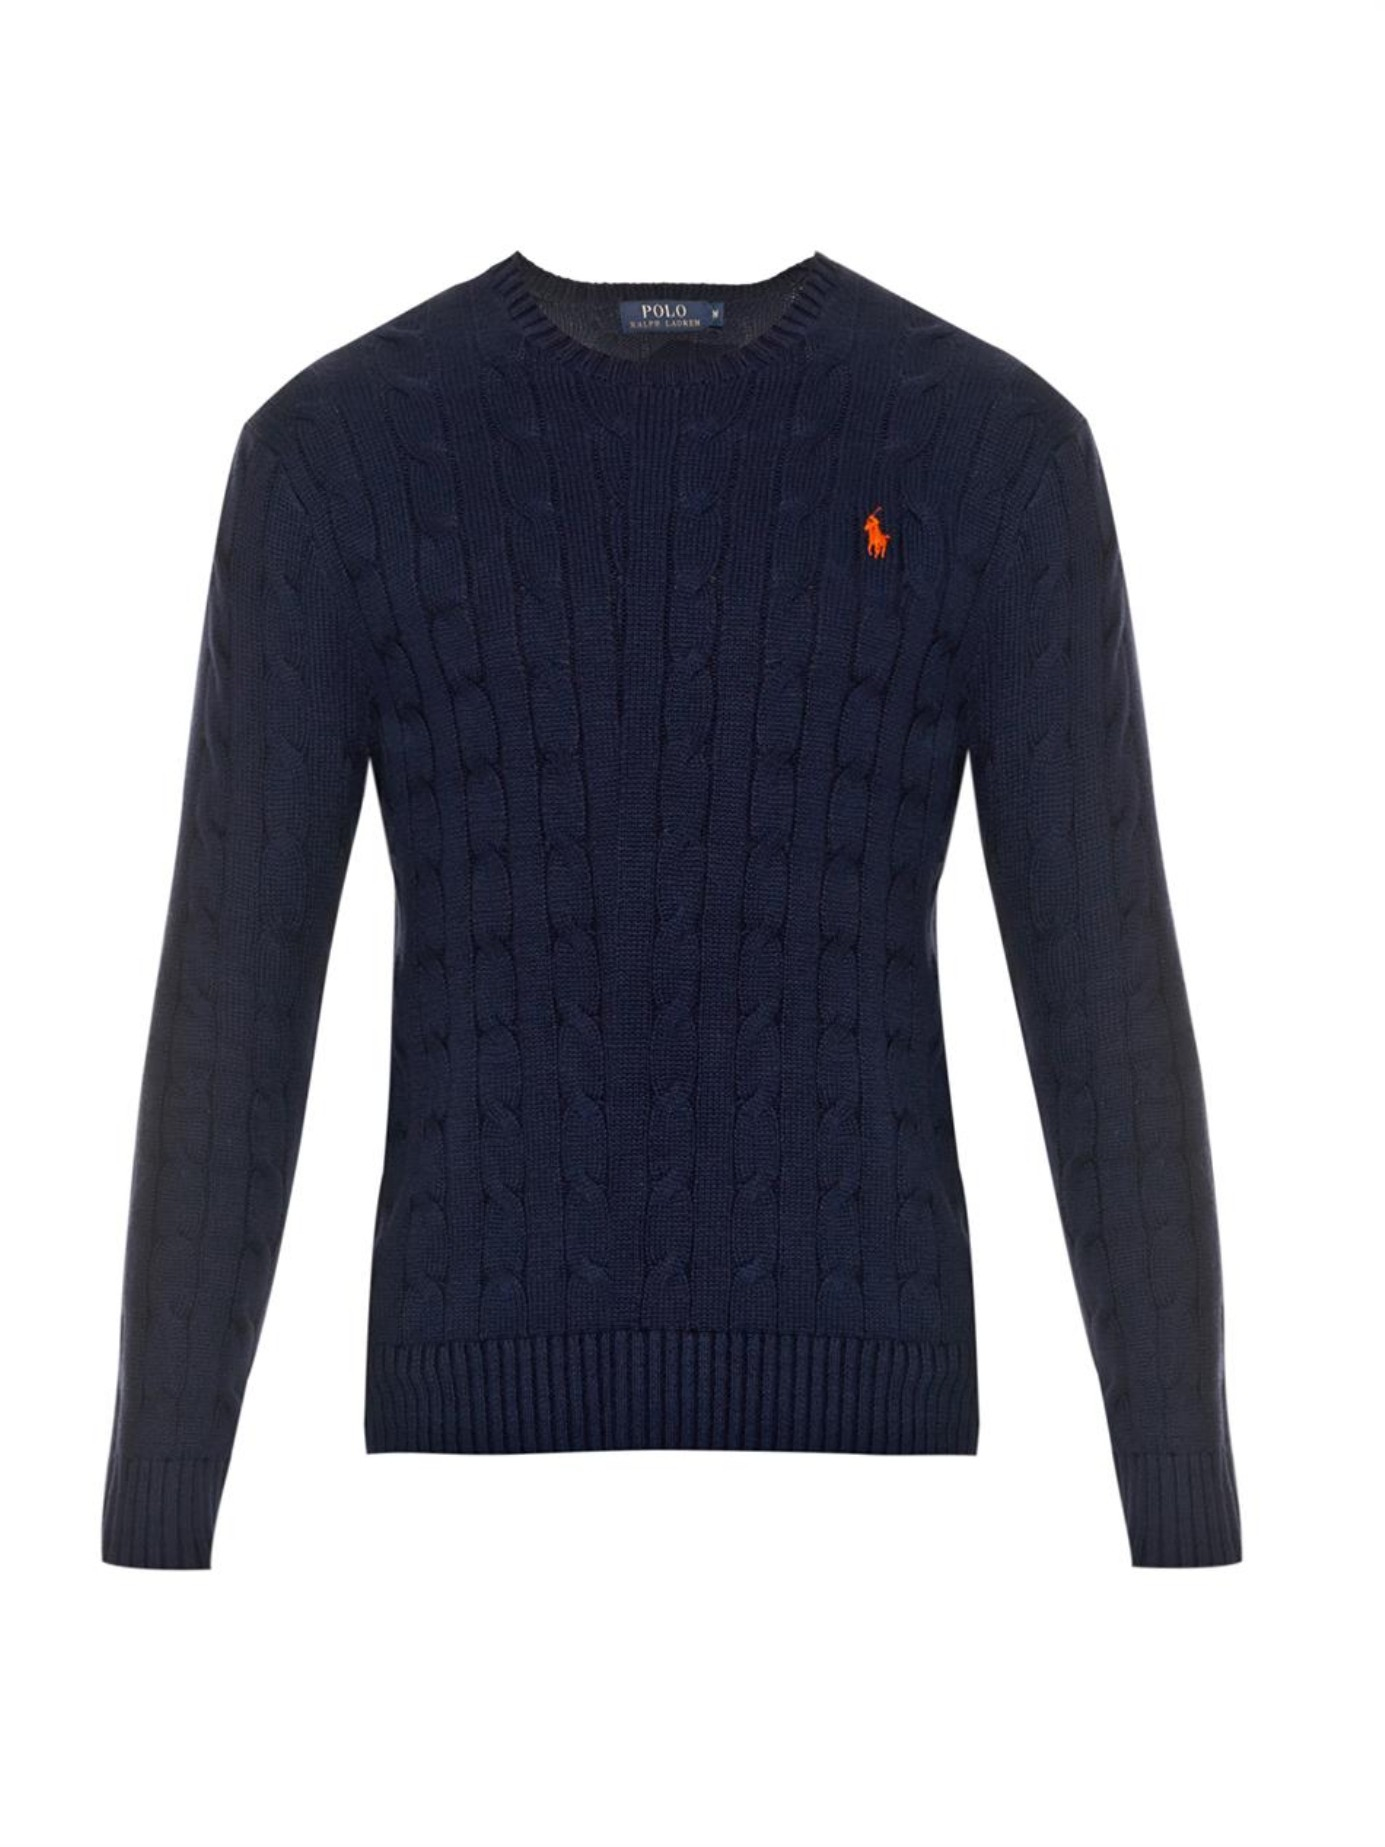 Polo ralph lauren Cable-Knit Cotton Sweater in Blue for Men | Lyst